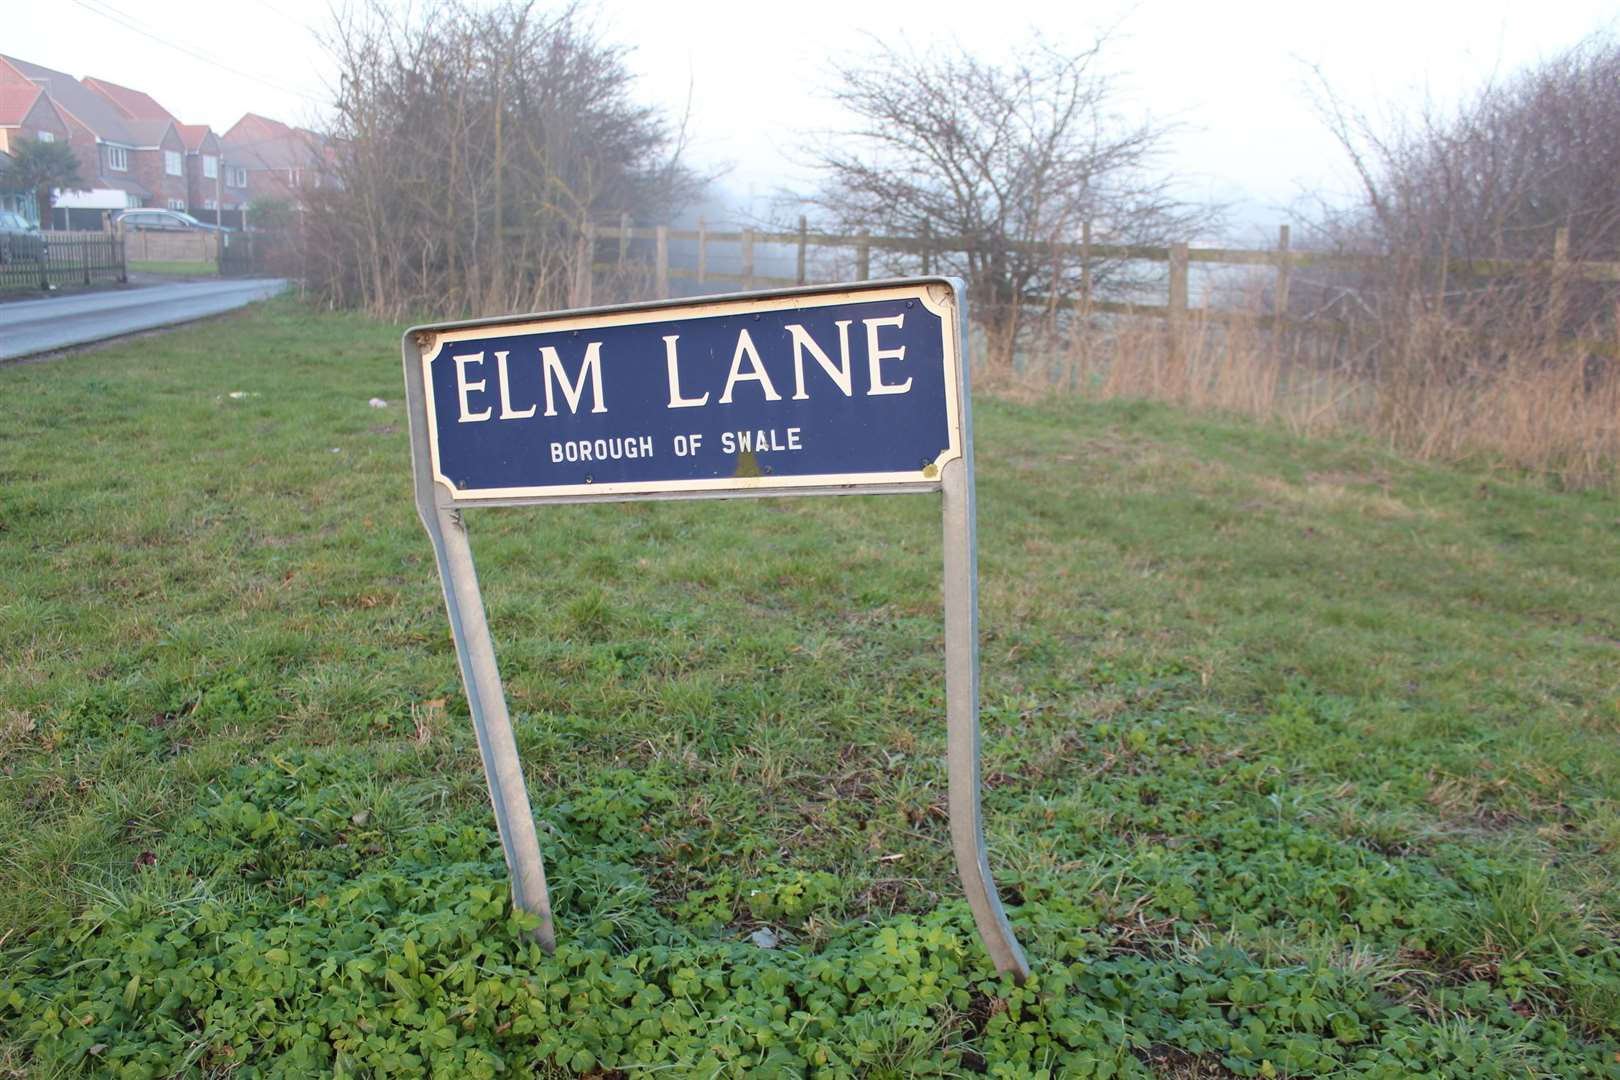 Three other planning applications for the Elm Lane area have been submitted to Swale council